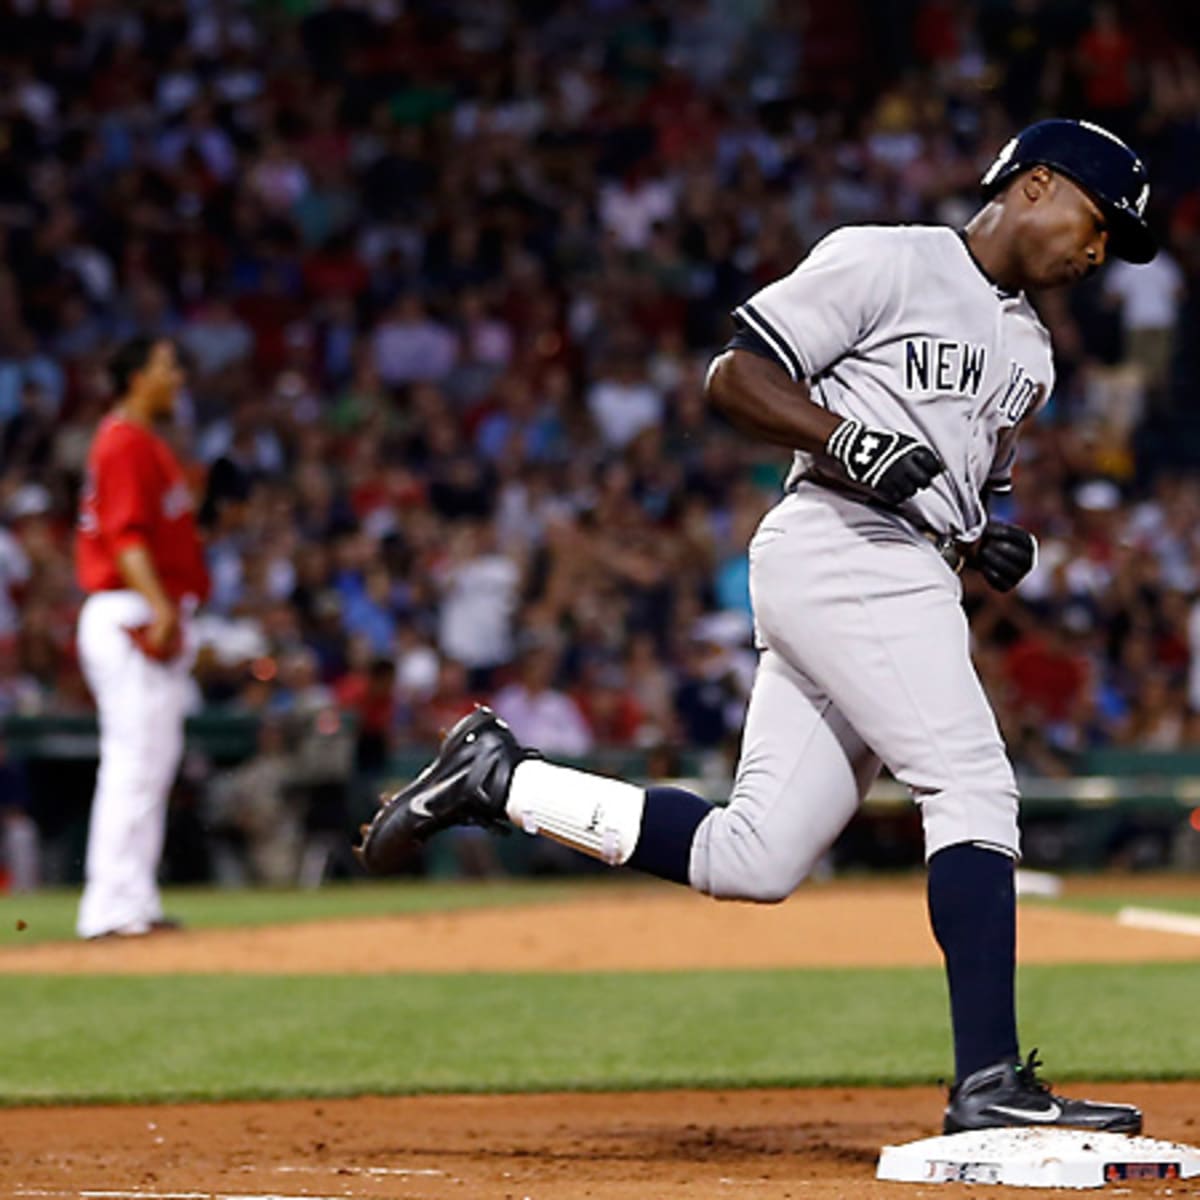 Is Alfonso Soriano on his way to the Hall of Fame? - Pinstripe Alley